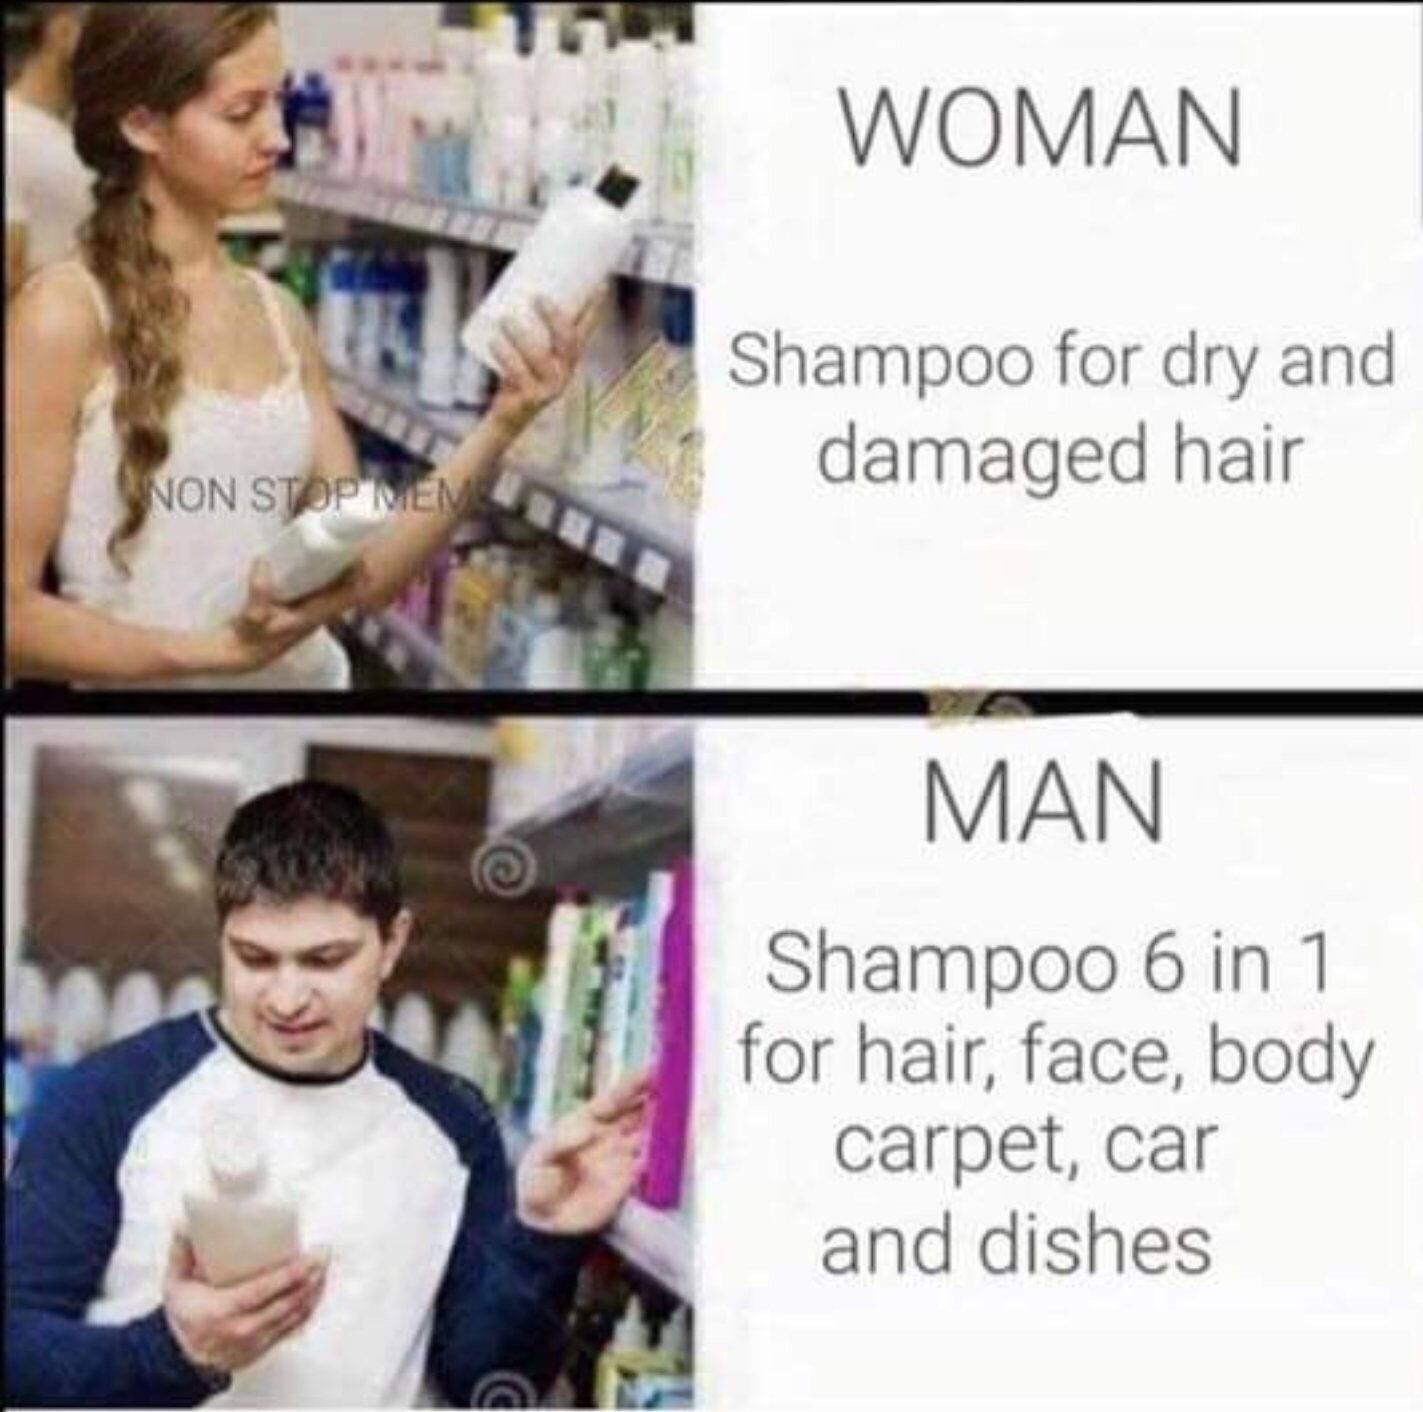 men shampoo funny - Woman Shampoo for dry and damaged hair Non Stop Menu Man Shampoo 6 in 1 for hair, face, body carpet, car and dishes